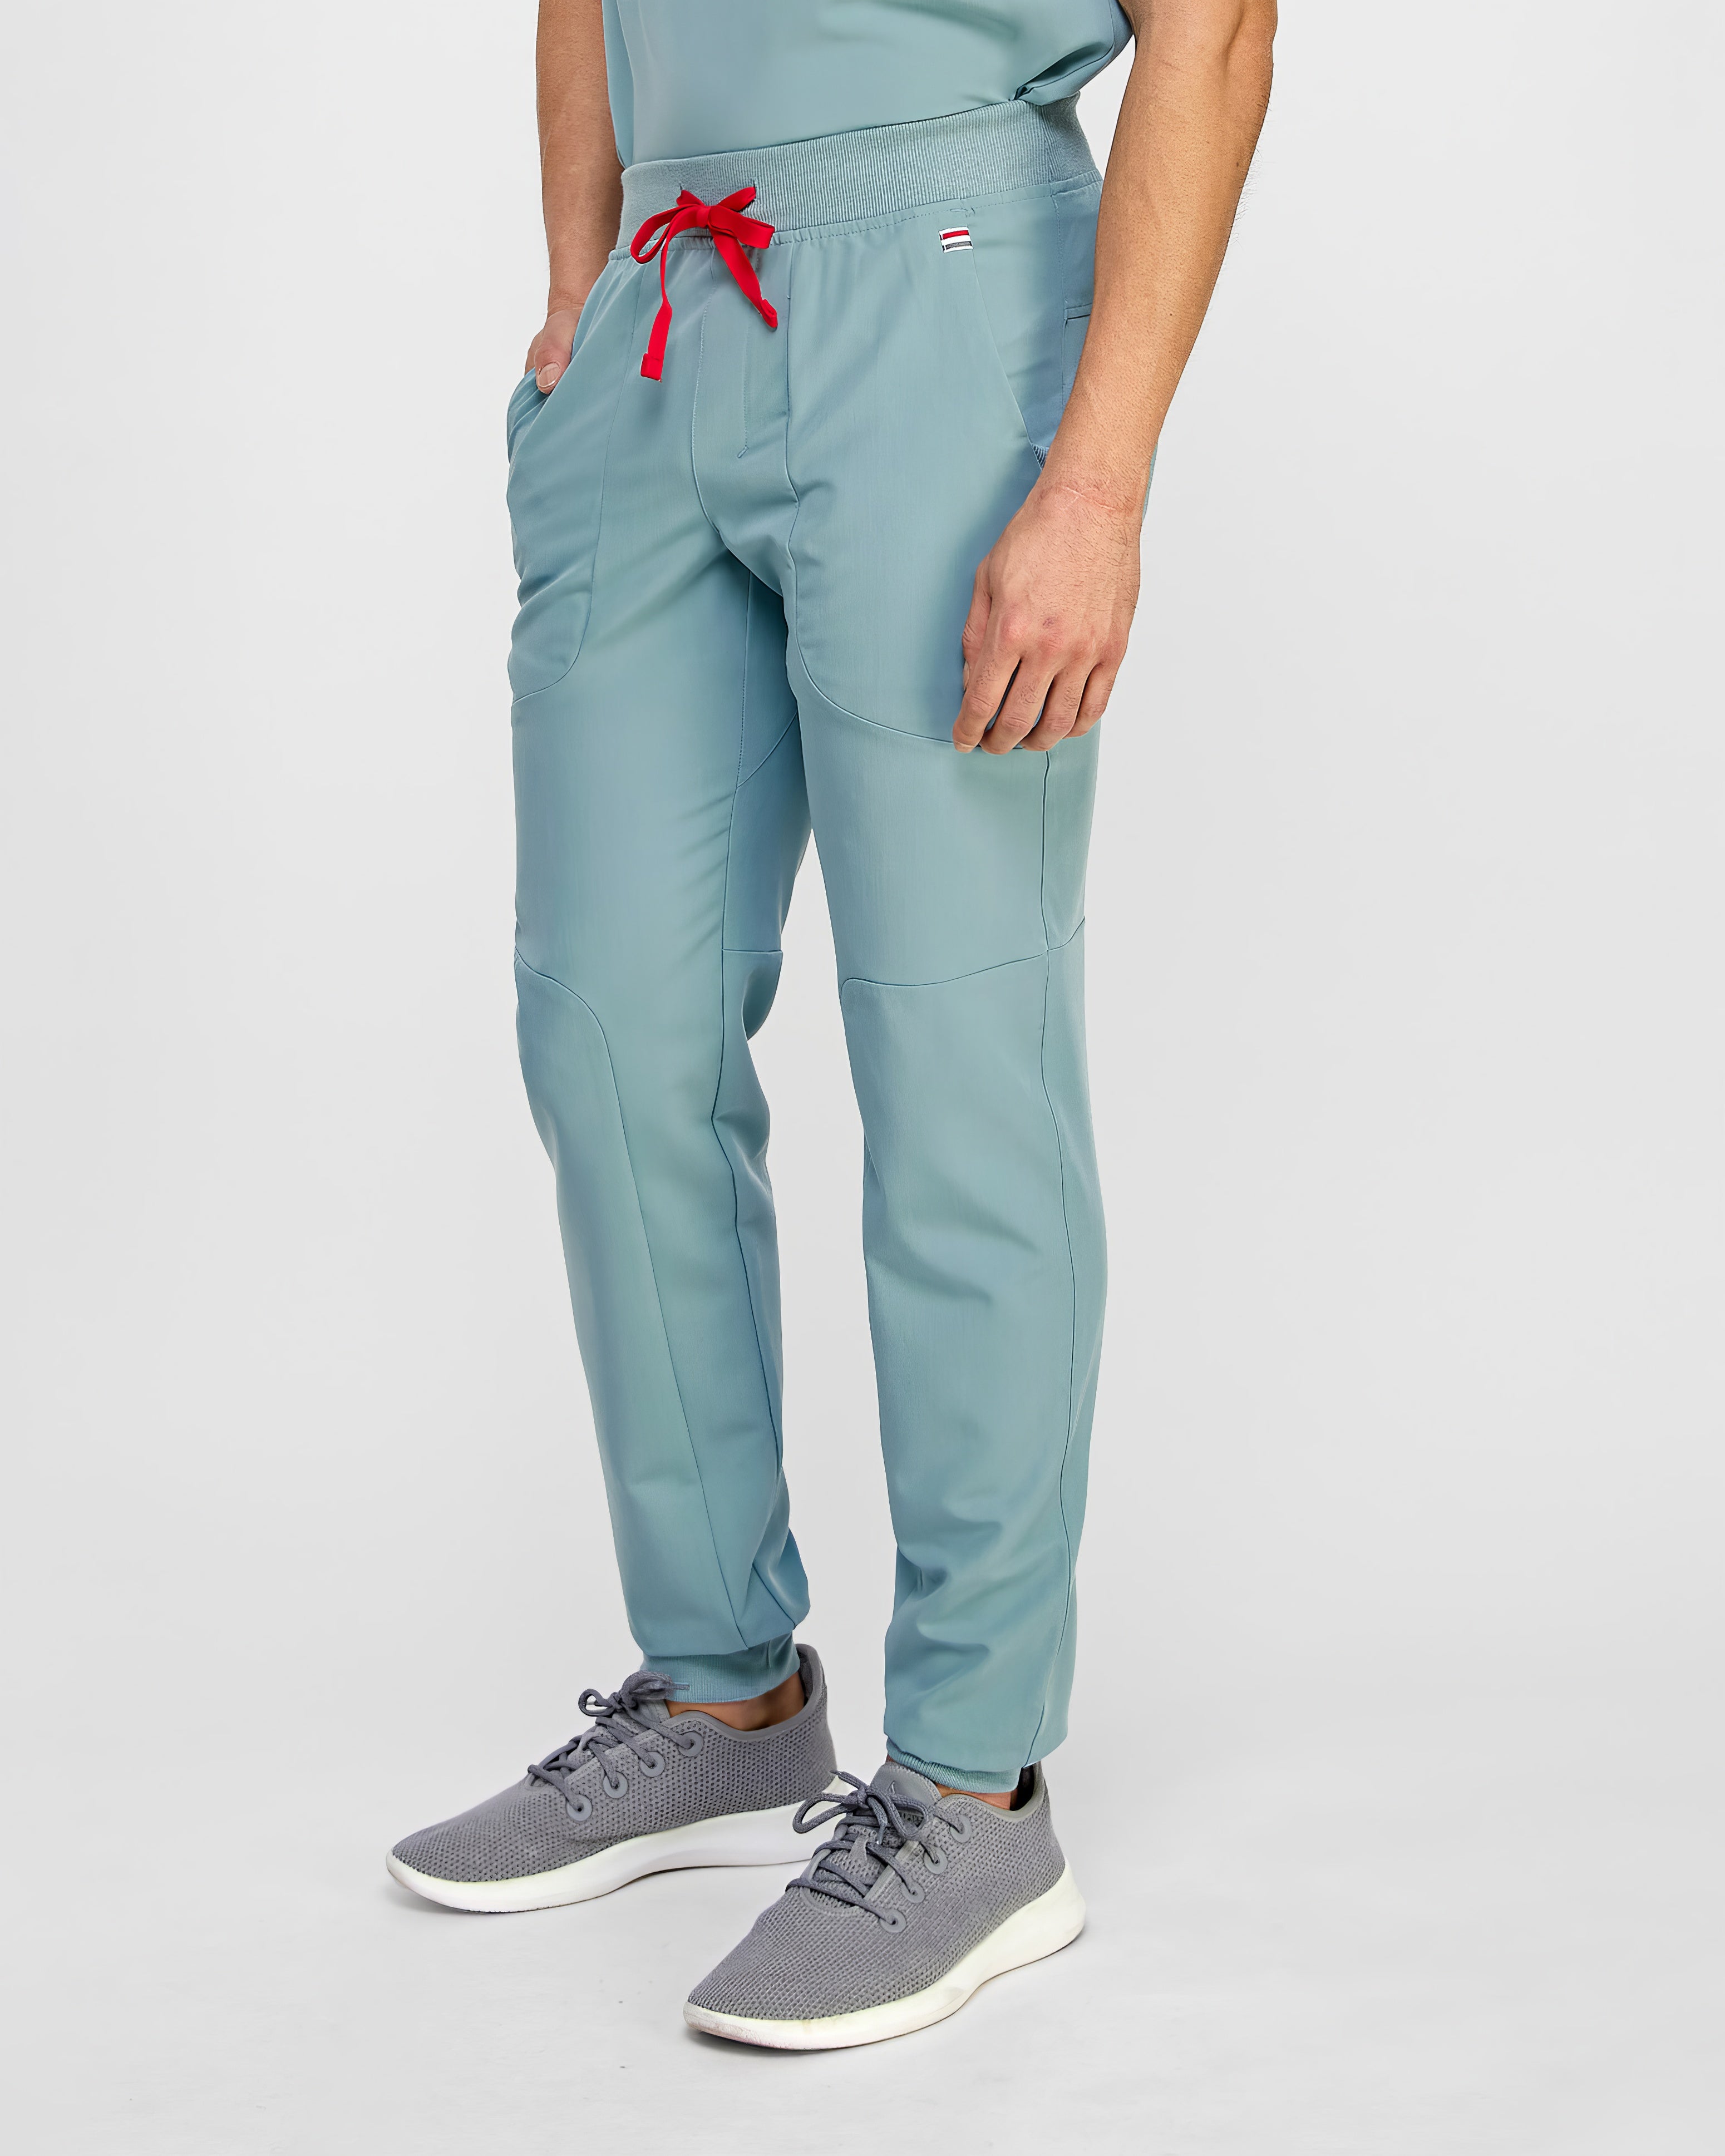 High-Quality Jogger Style Blue Medical Scrubs Like Figs & Cherokee